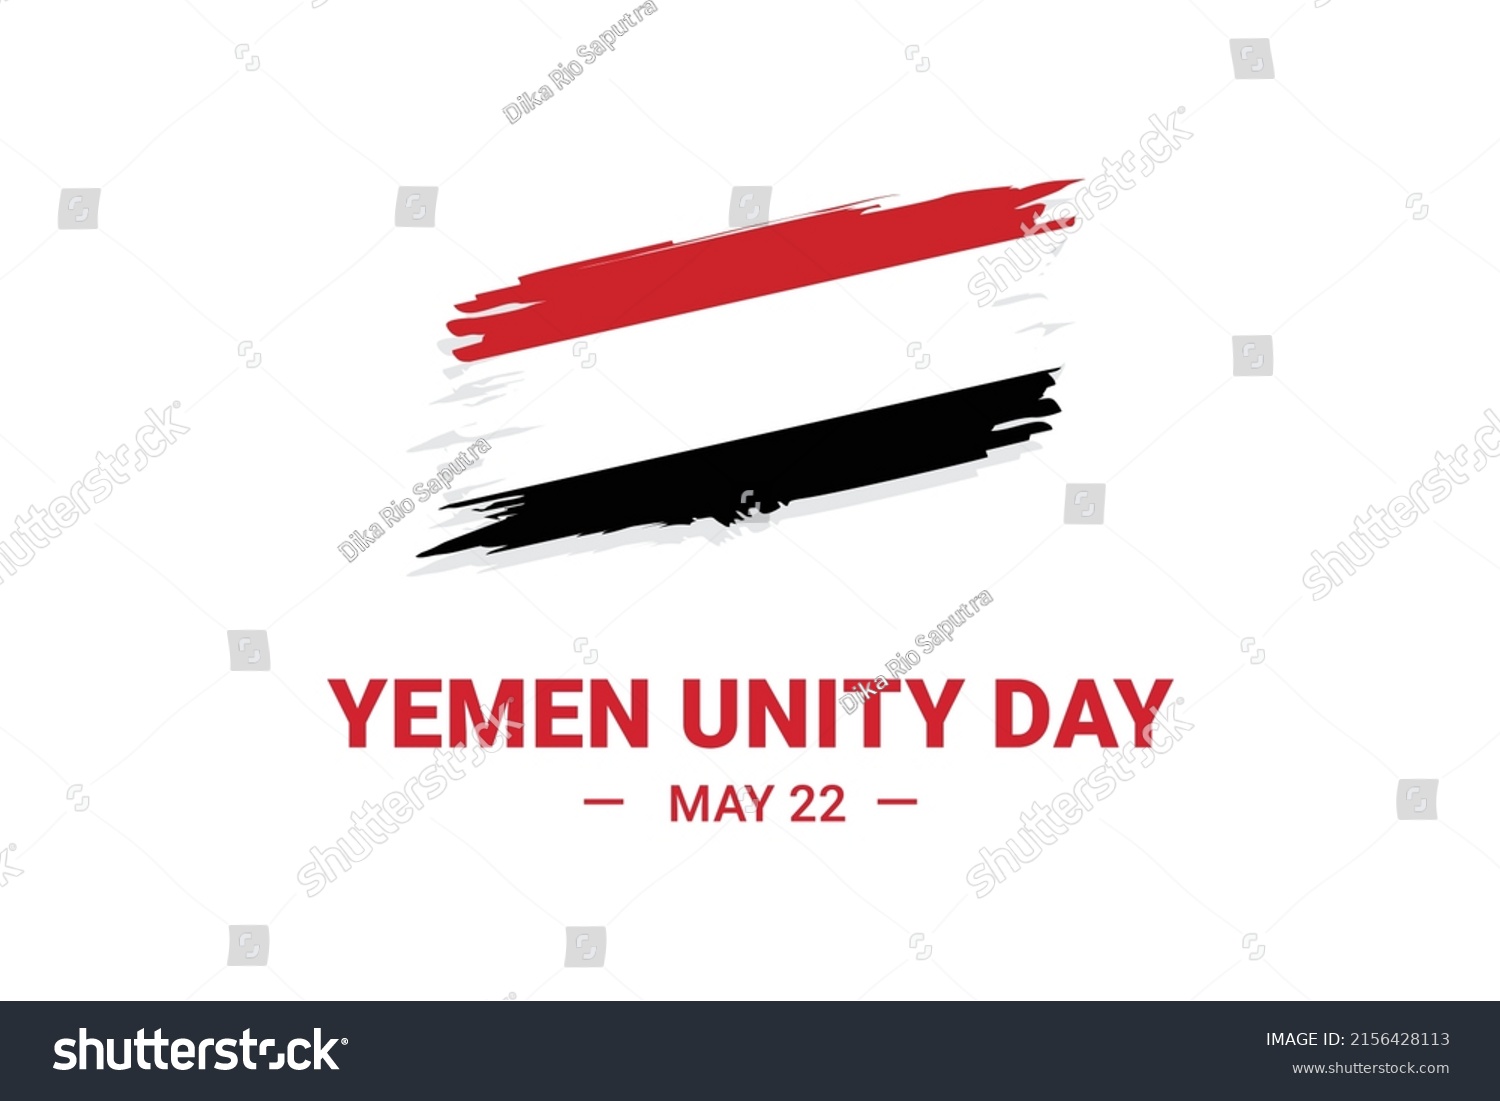 SVG of Yemen Unity Day. Vector Illustration. The illustration is suitable for banners, flyers, stickers, cards, etc. svg